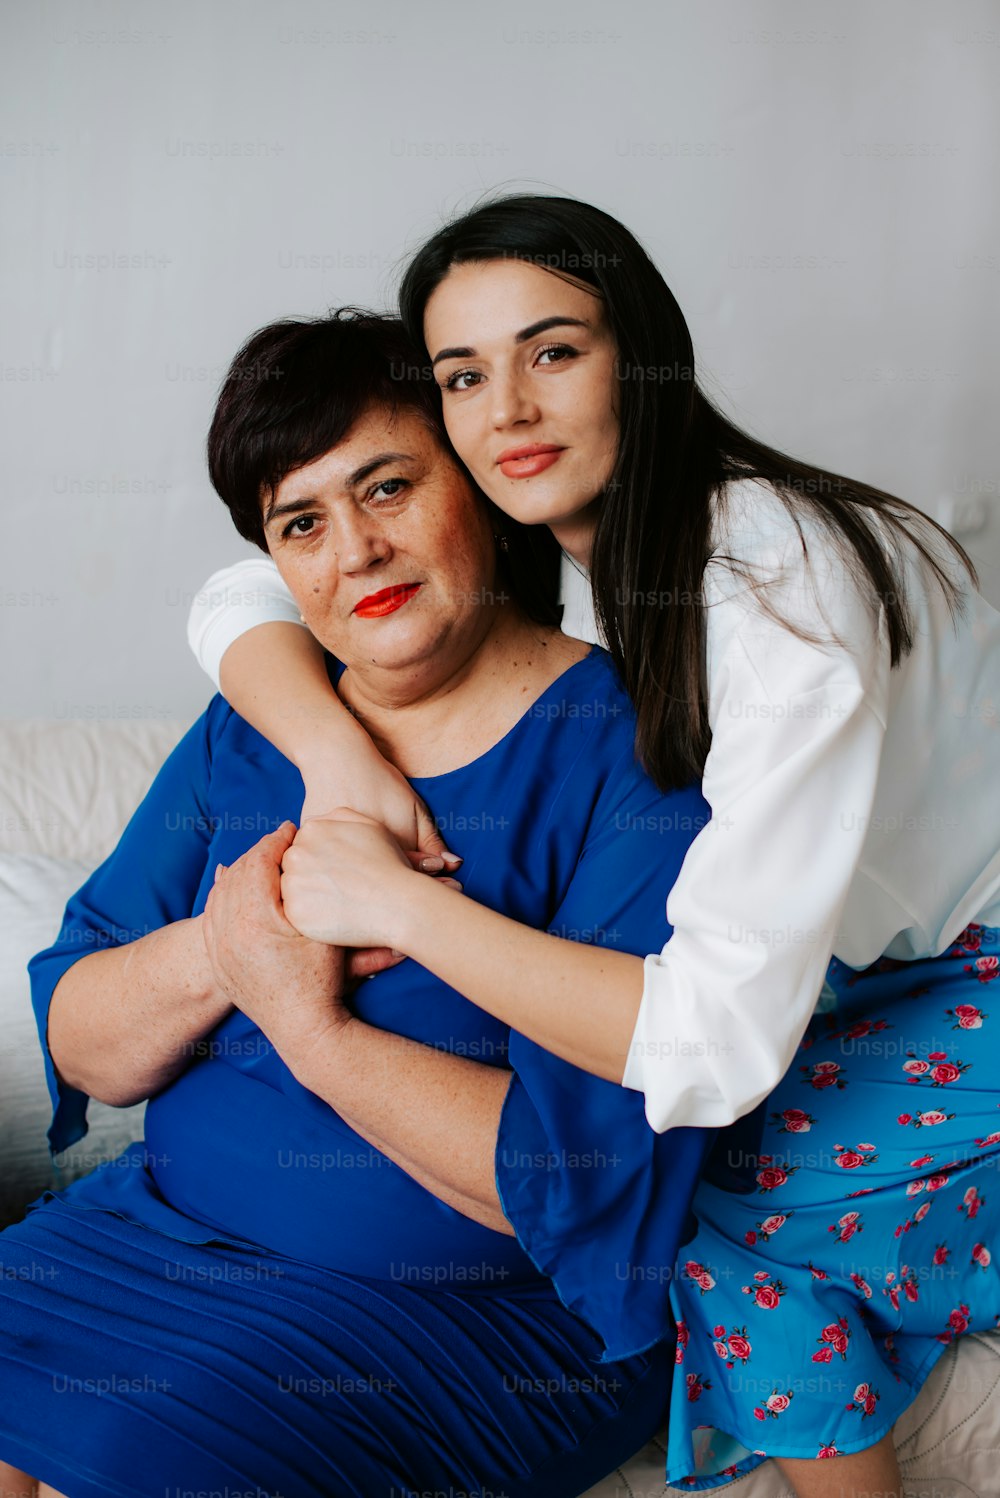 a woman hugging another woman on a bed